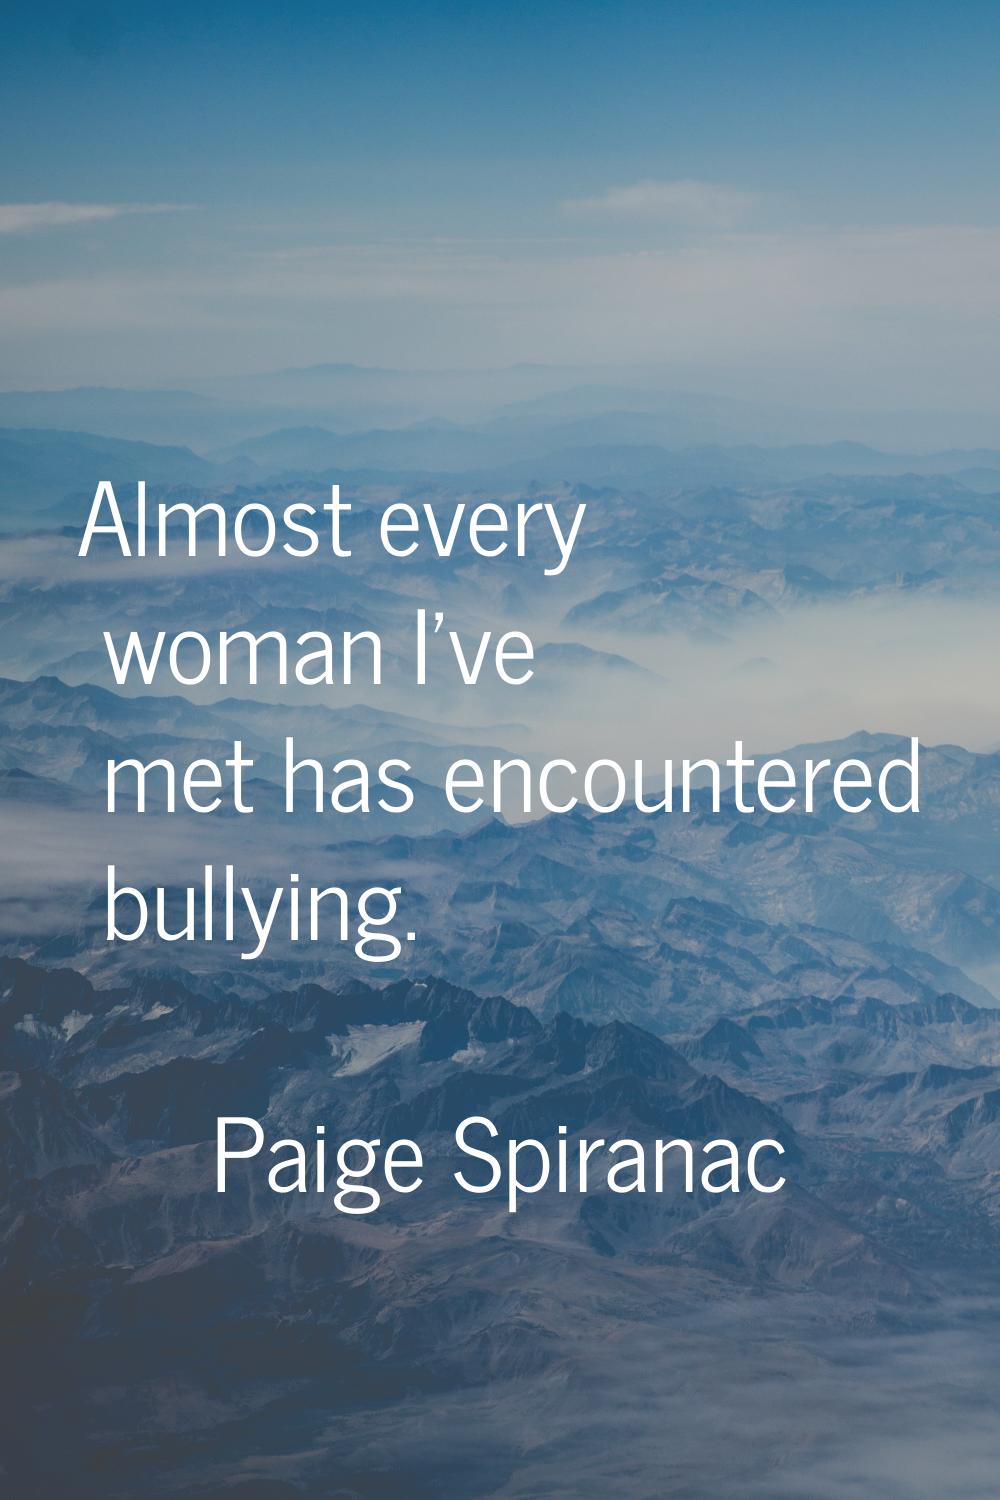 Almost every woman I've met has encountered bullying.